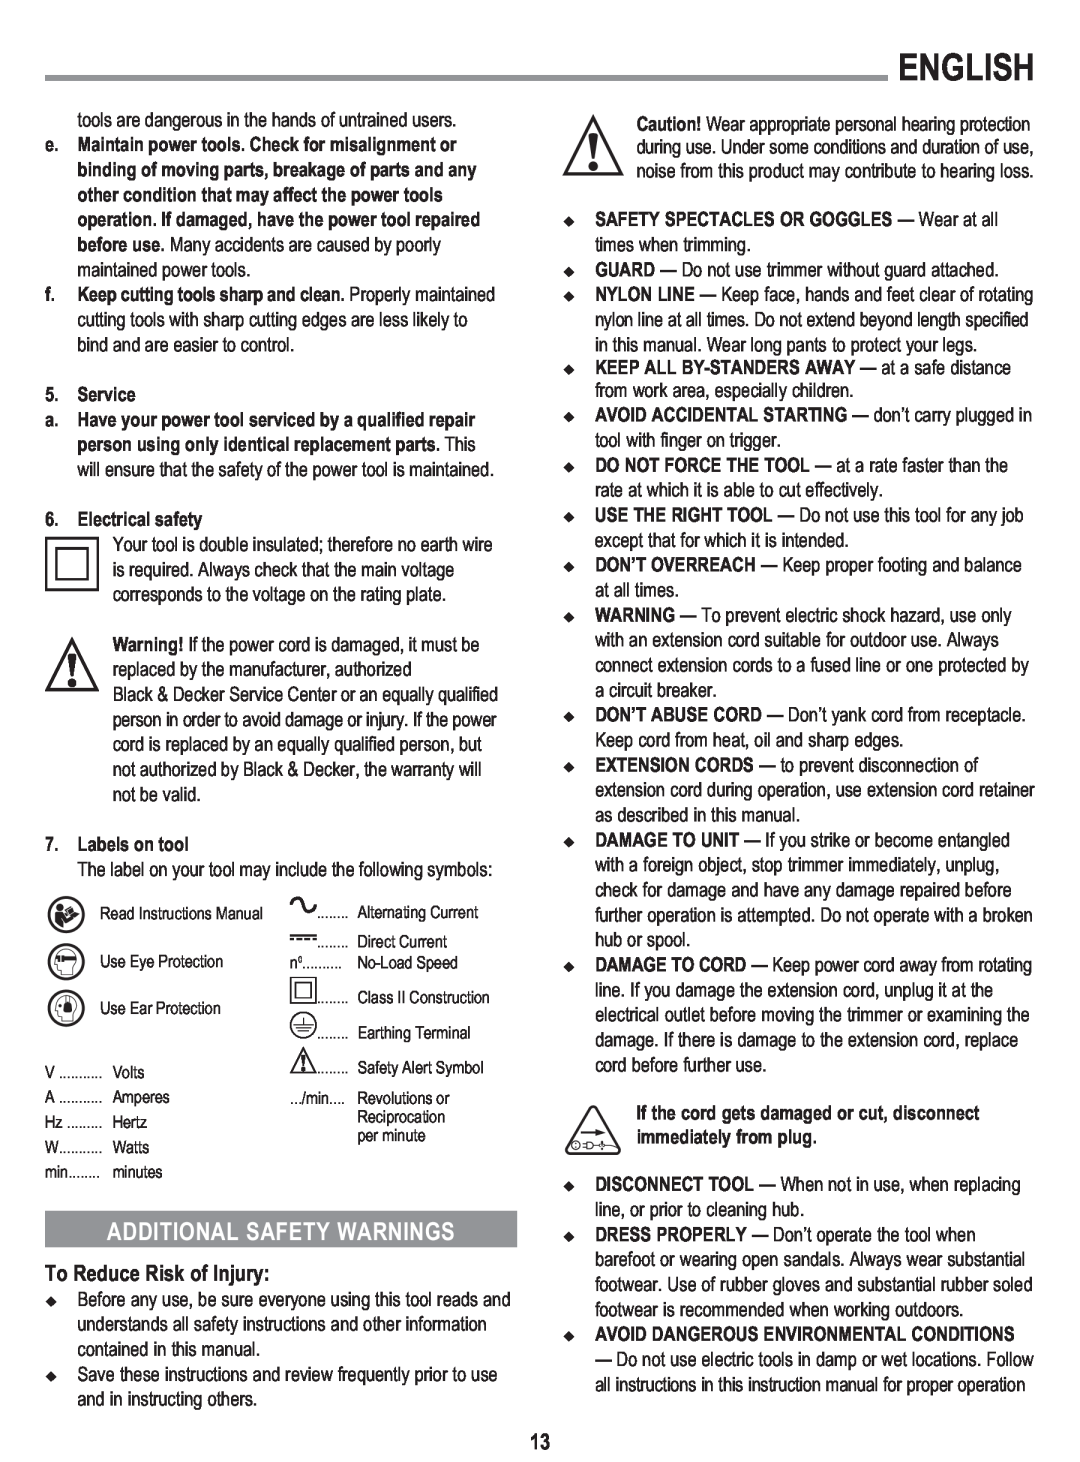 Black & Decker GL300 instruction manual Additional Safety Warnings, To Reduce Risk of Injury, English 